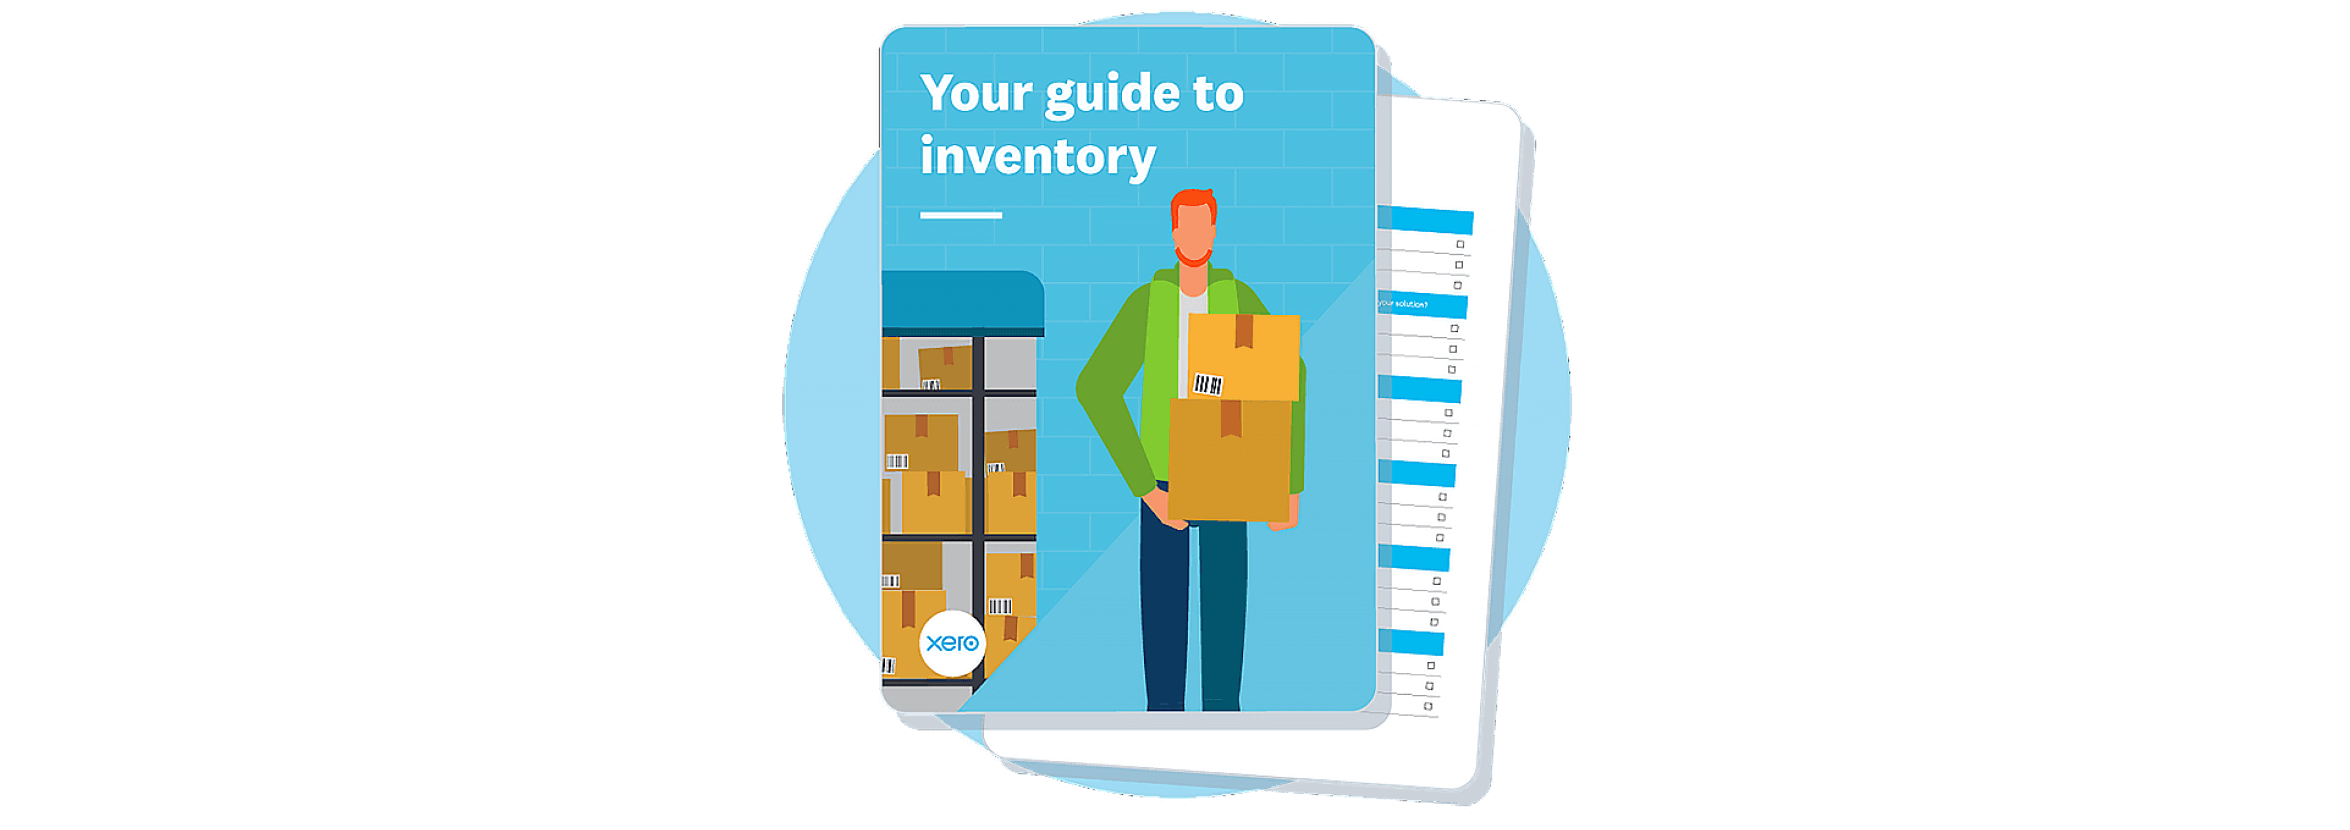 The cover of Xero’s guide to inventory.